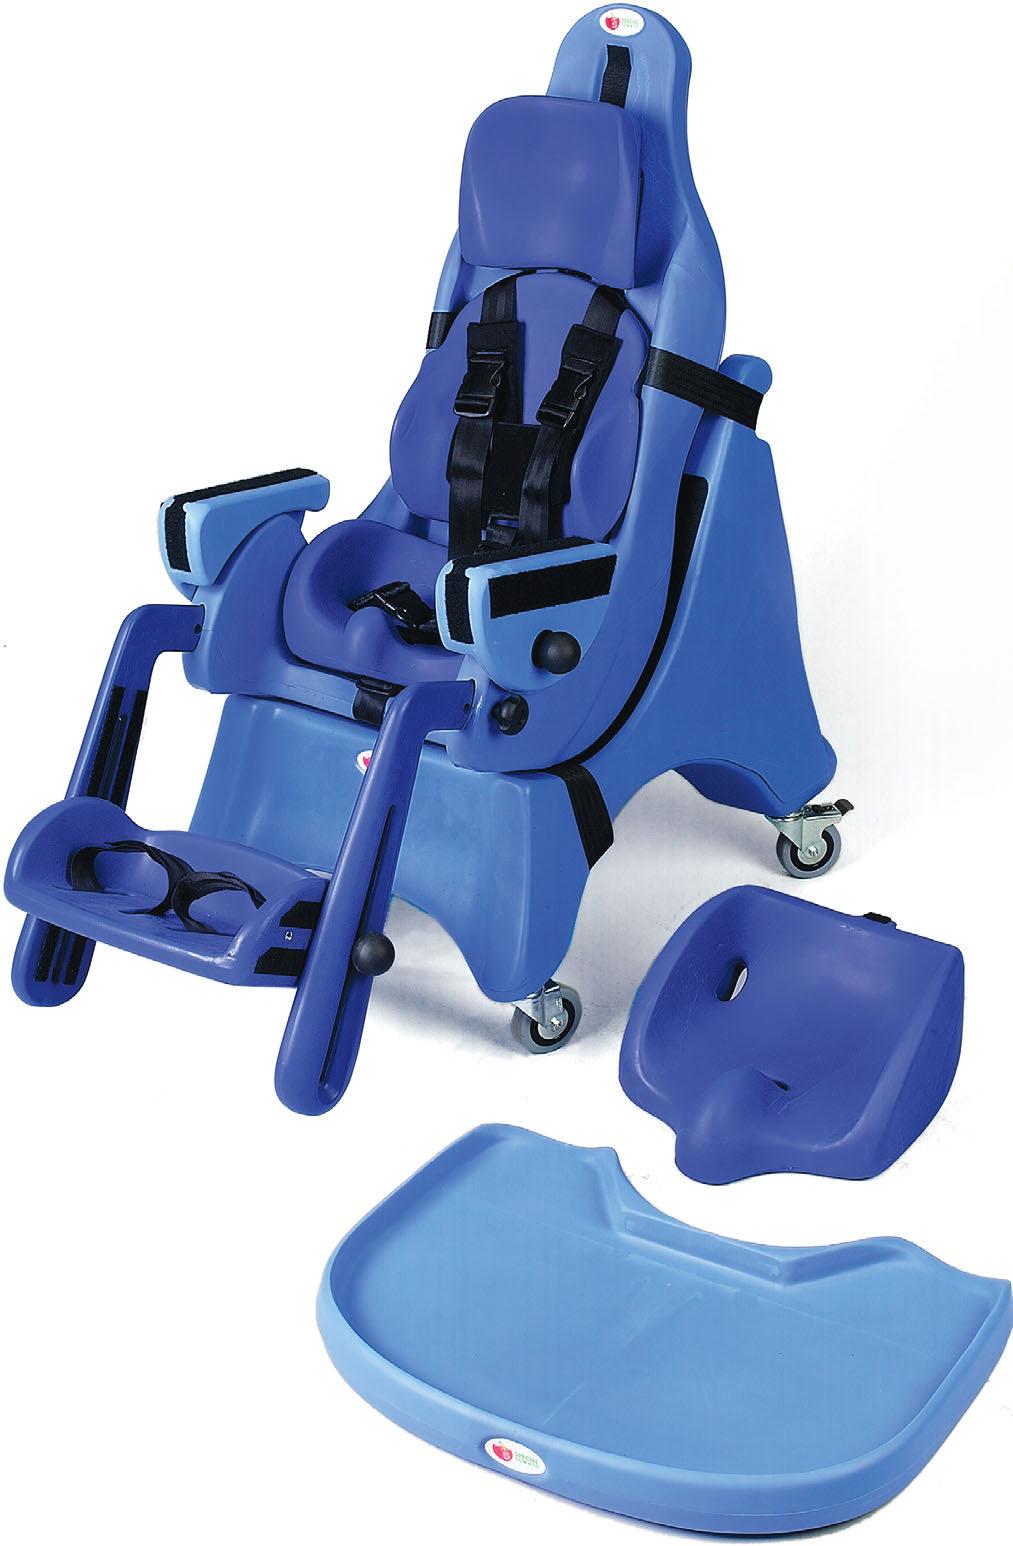 Regular Head Lateral Head Proper Made Easy Multi-Positioning Seat To securely hold your child in place with the proper position- The Special Tomato Multi-Positioning Seat has been designed to offer